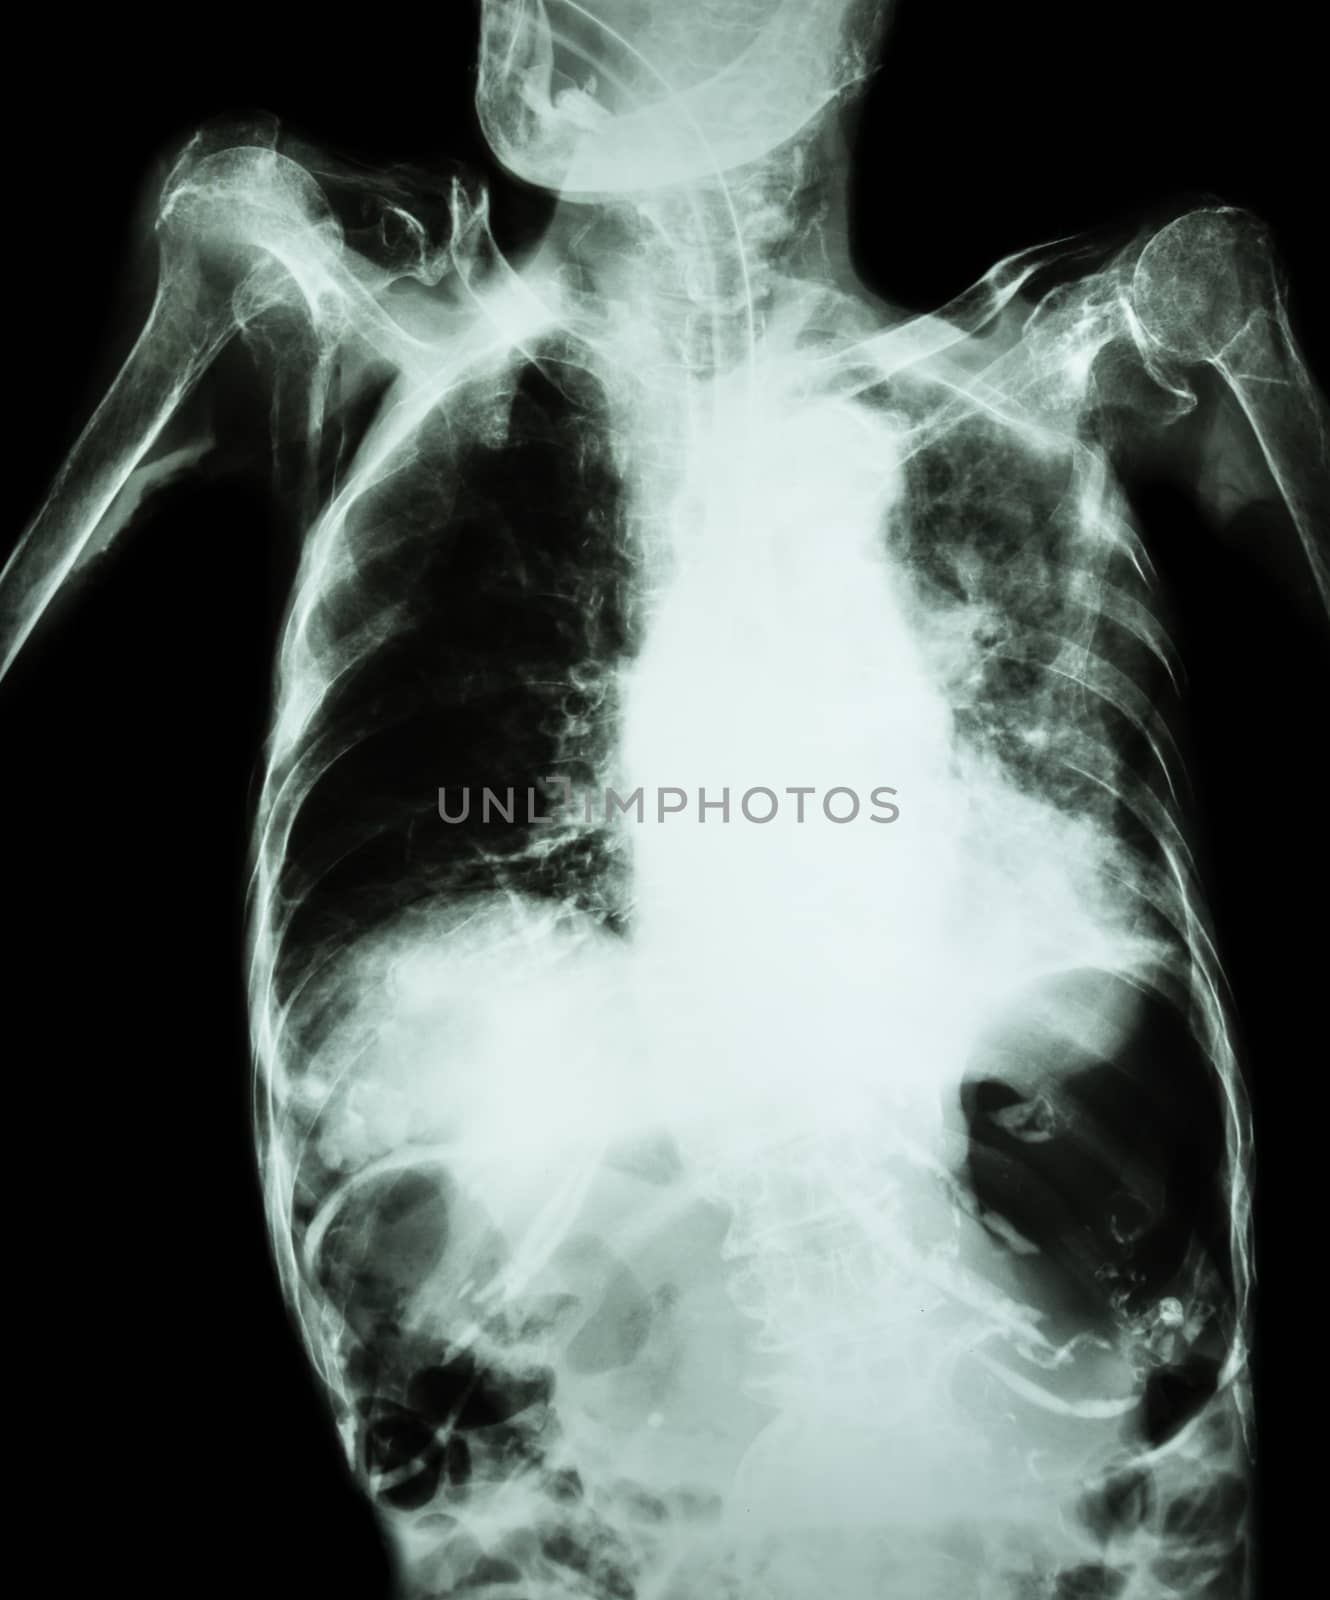 Pulmonary Tuberculosis with acute respiratory failure ( Film chest x-ray of old patient show alveolar and interstitial infiltration both lung with endotracheal tube ) due to mycobacterium tuberculosis